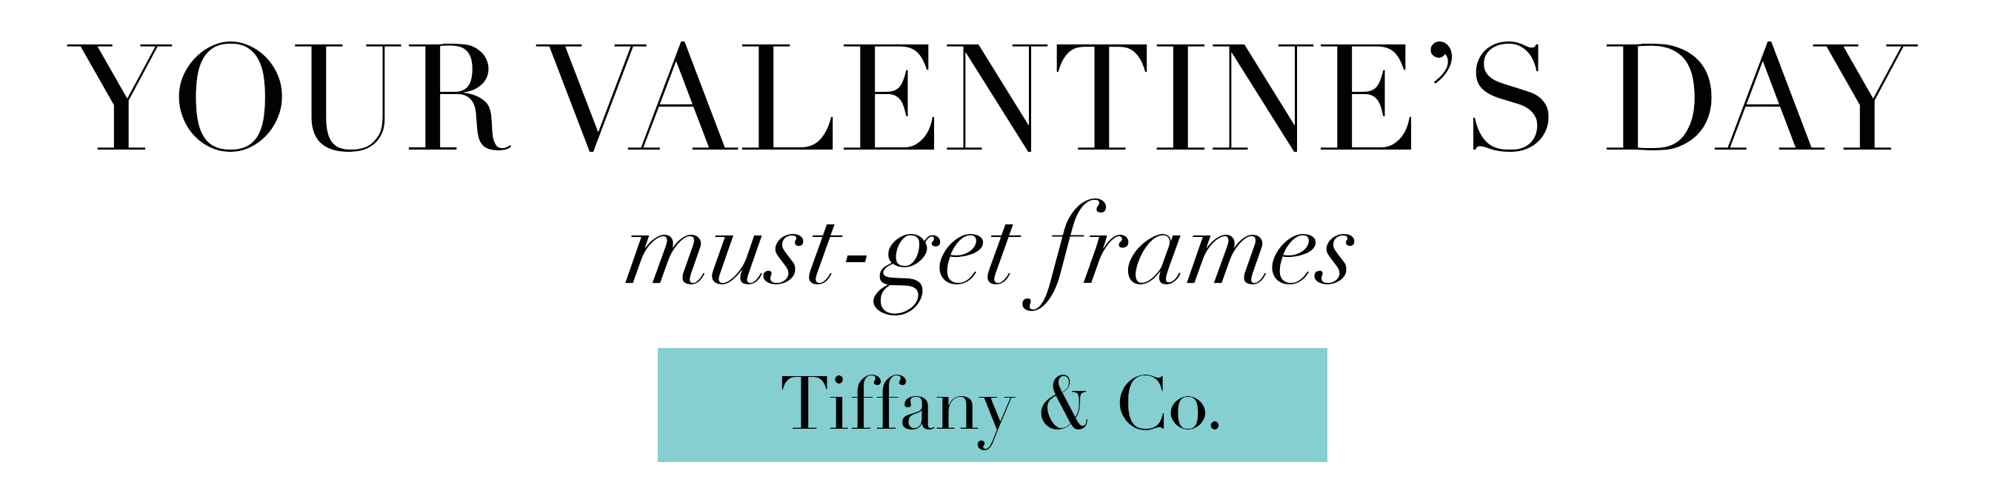 Your Valentine's Day - Must-Get Frames - Tiffany & Co.